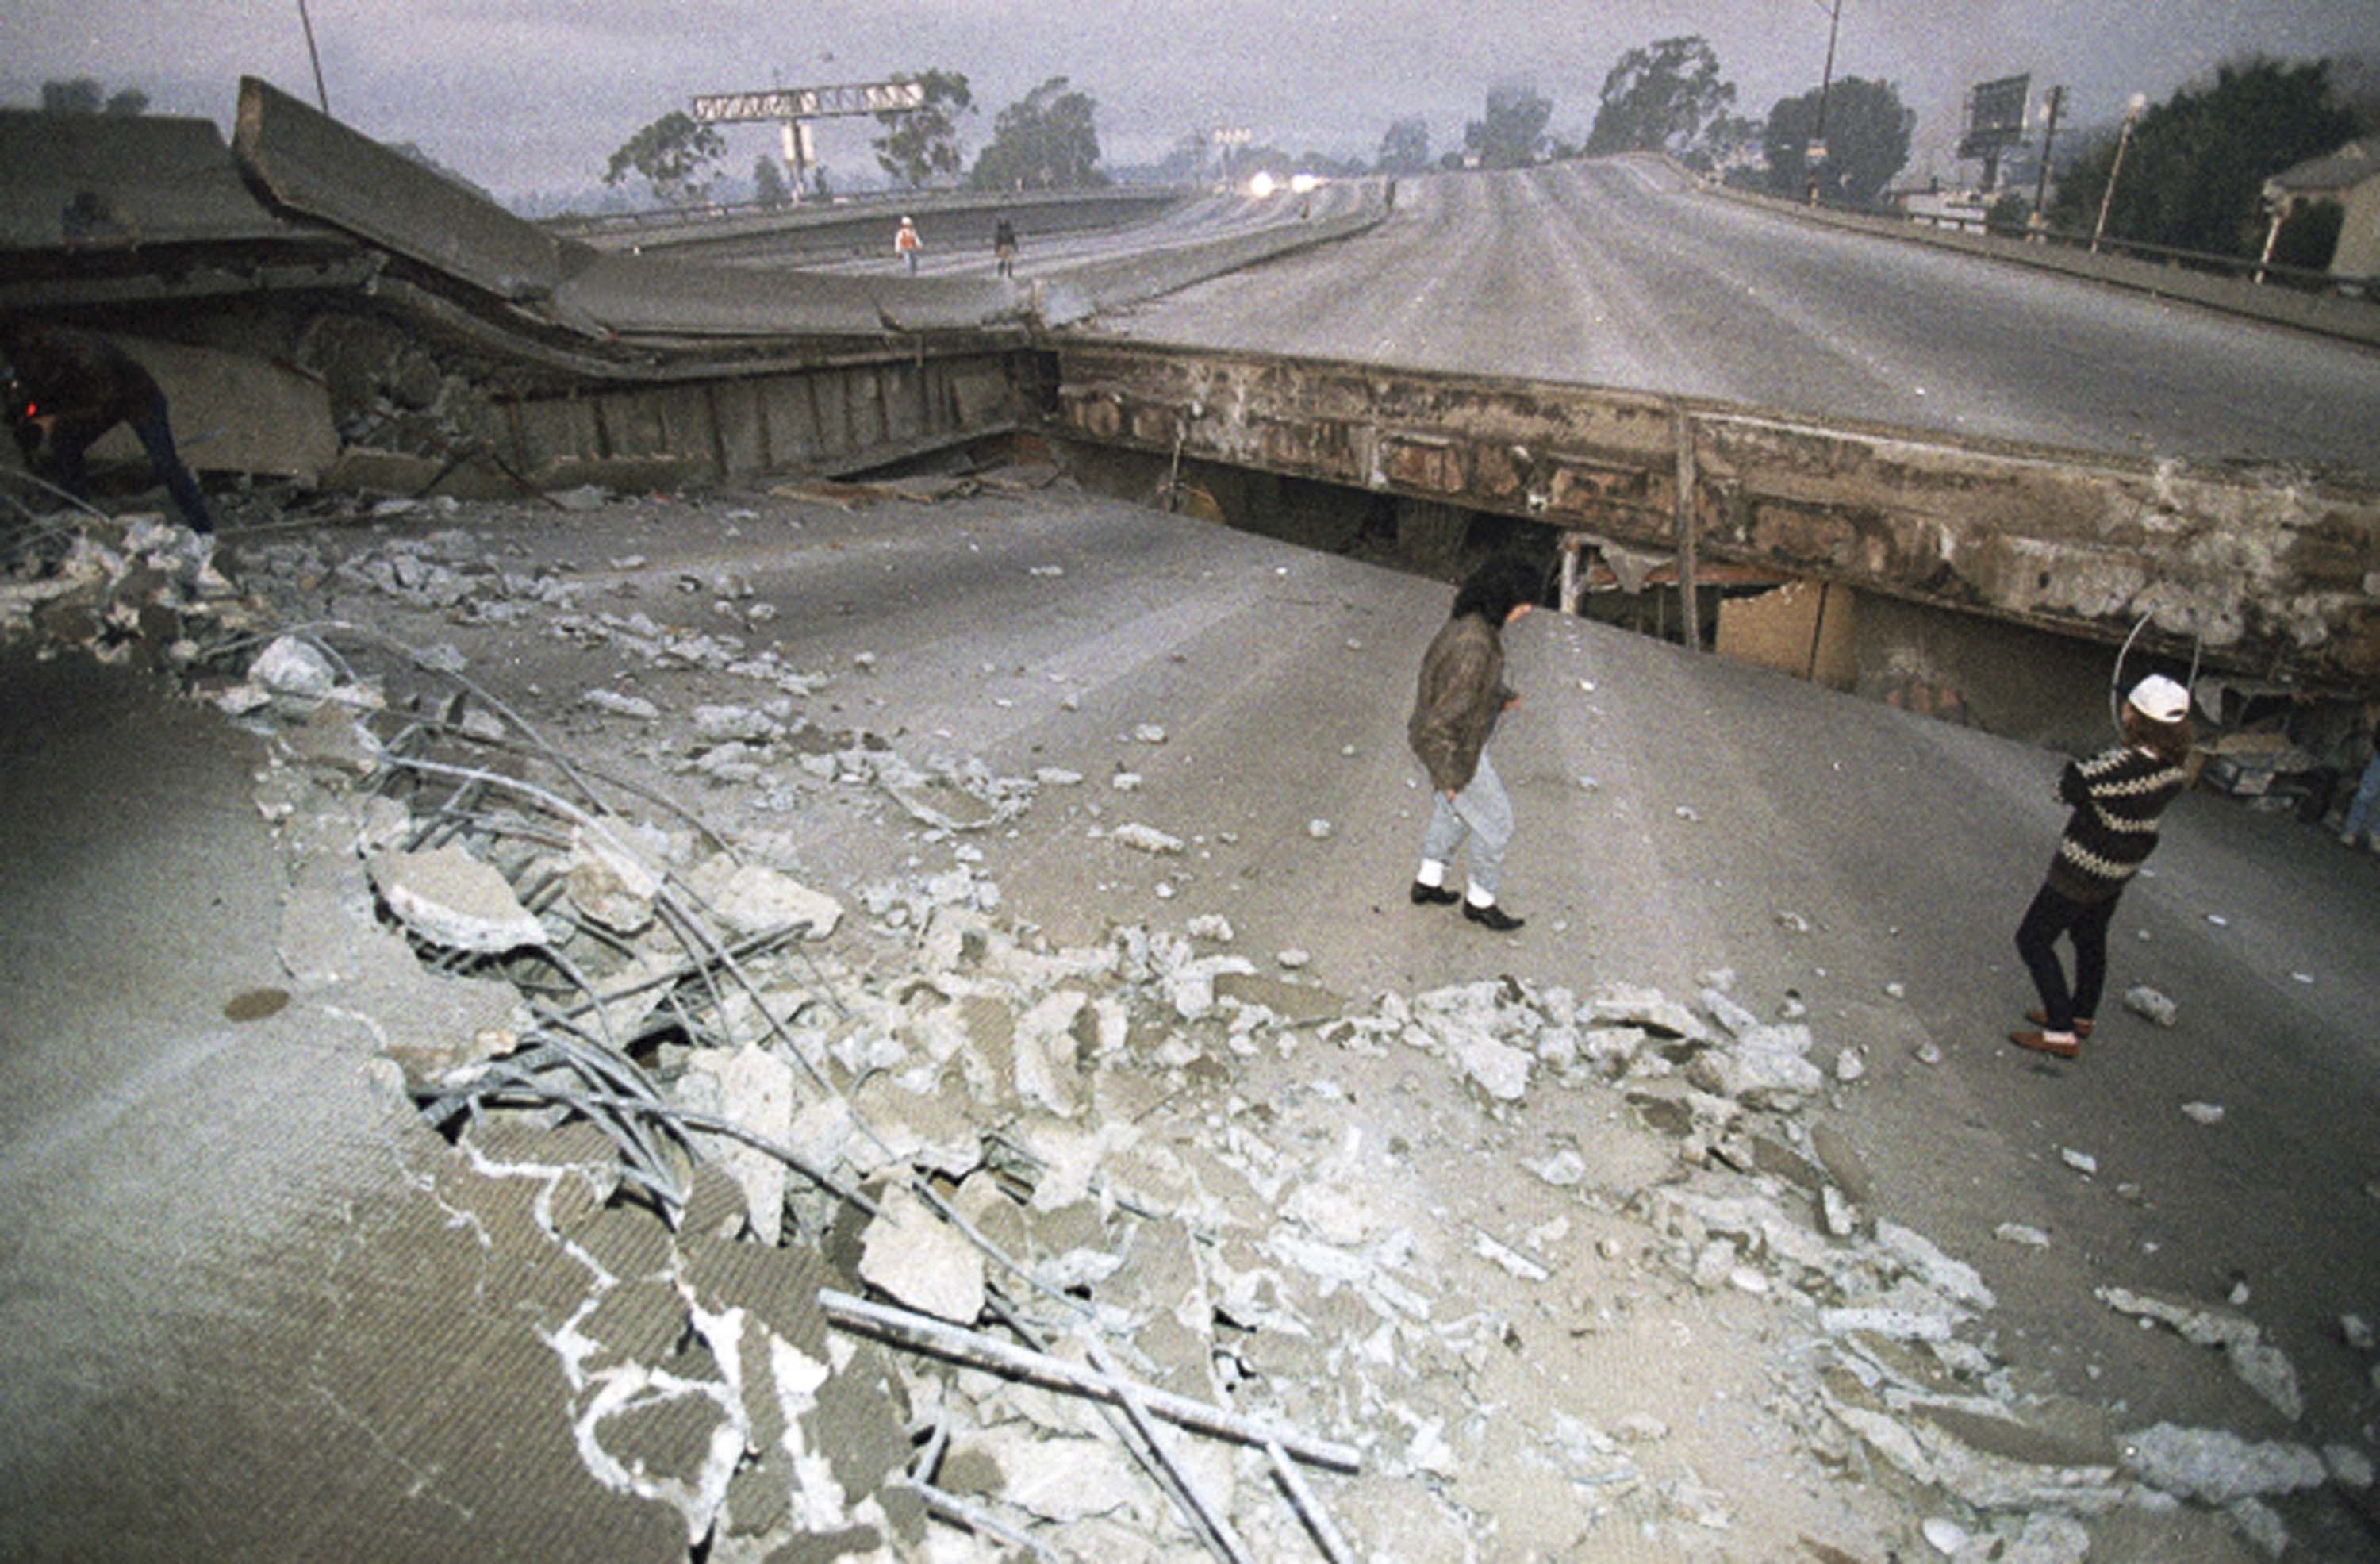 FILE - In this Jan. 17, 1994 file photo, Interstate 10, the Santa Monica Freeway, split and collapsed over La Cienega Boulevard following the Northridge quake in the predawn hours in Los Angeles. Twenty-five years ago this week, a violent, pre-dawn earthquake shook Los Angeles from its sleep, and sunrise revealed widespread devastation, with dozens killed and $25 billion in damage. (AP Photo/Eric Draper, File)